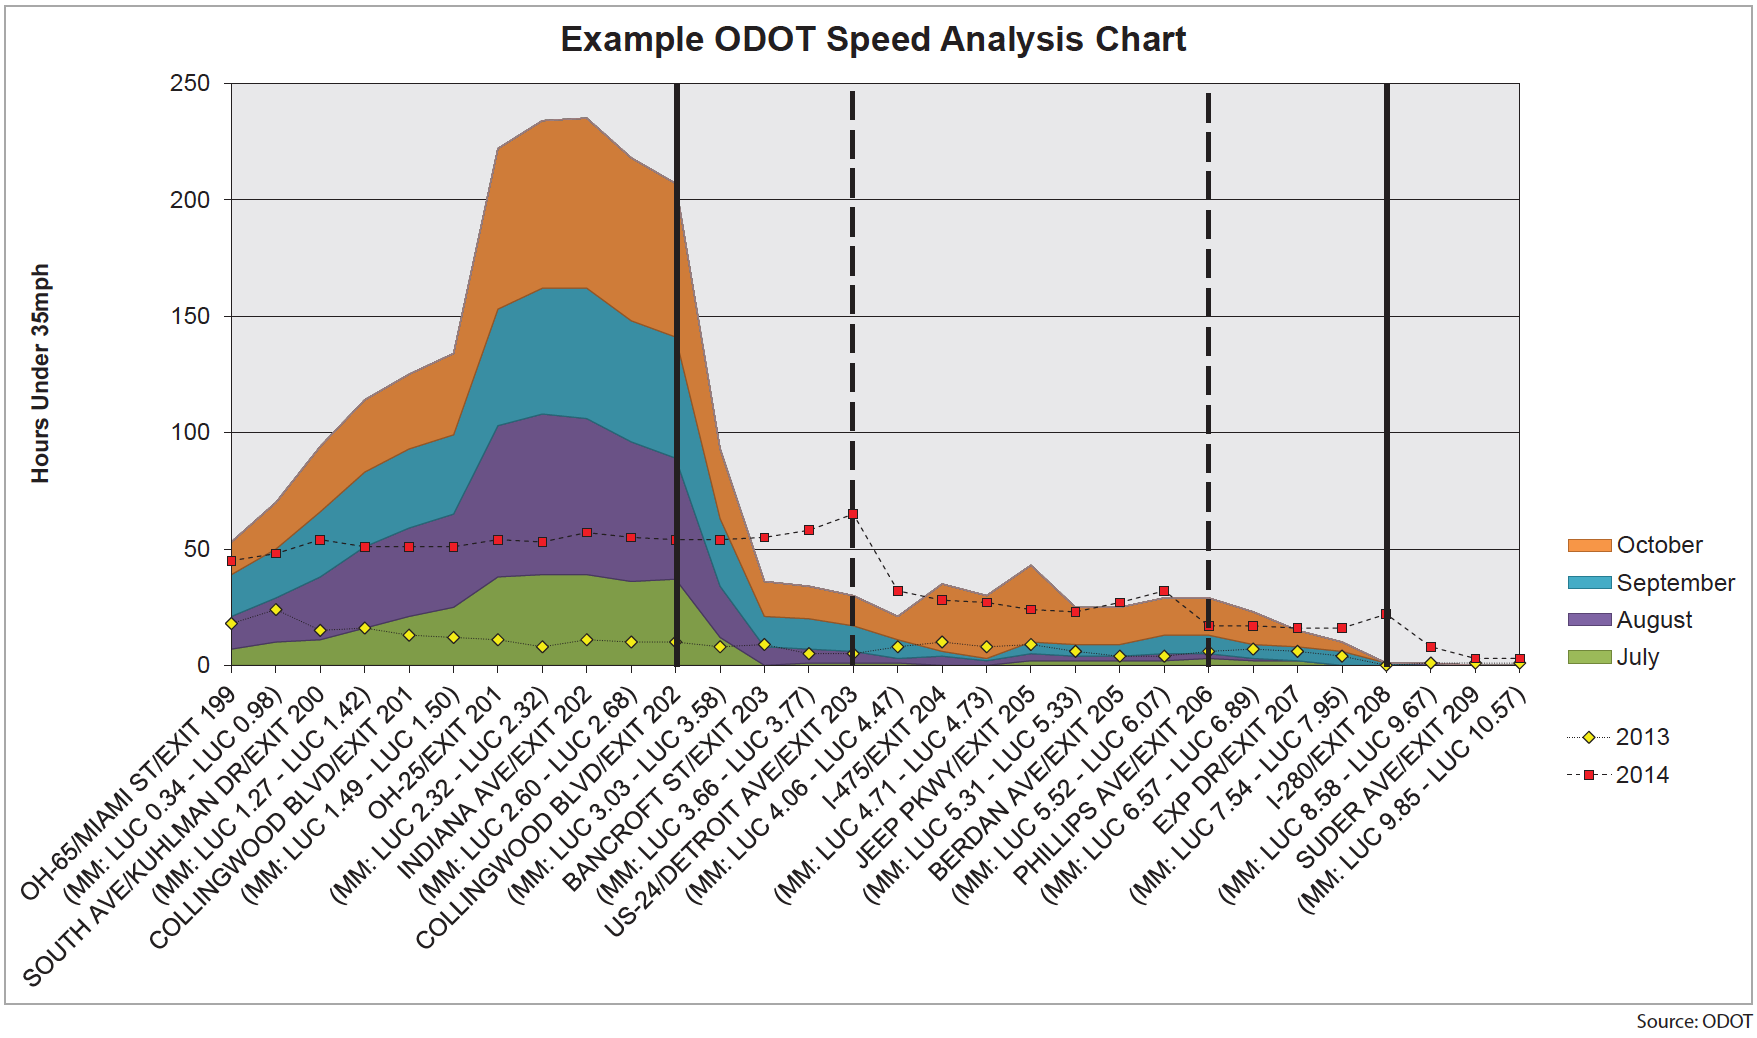 Example of an Ohio DOT speed analysis chart. The chart is a stacked area chart showing hours below 35 miles per hour at specific locations for a range of months. October appears to have the largest number of hours under 35 mph.